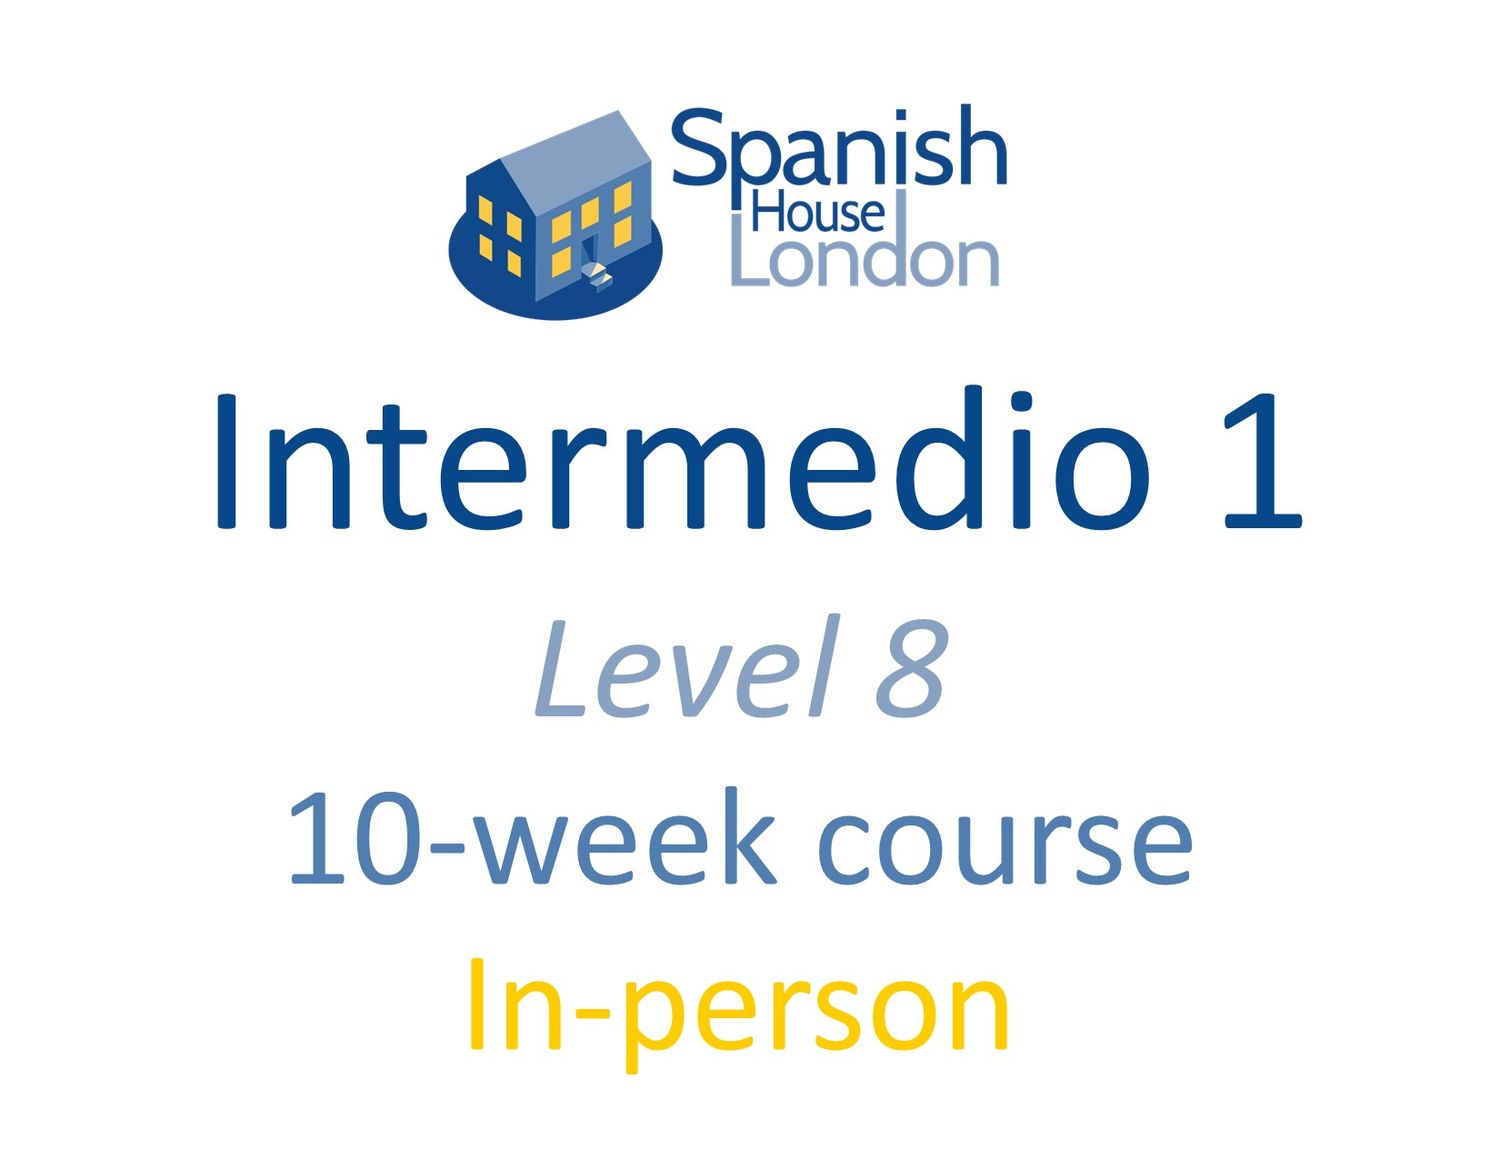 Intermedio 1 Course starting on 15th May at 6pm in Euston / King's Cross